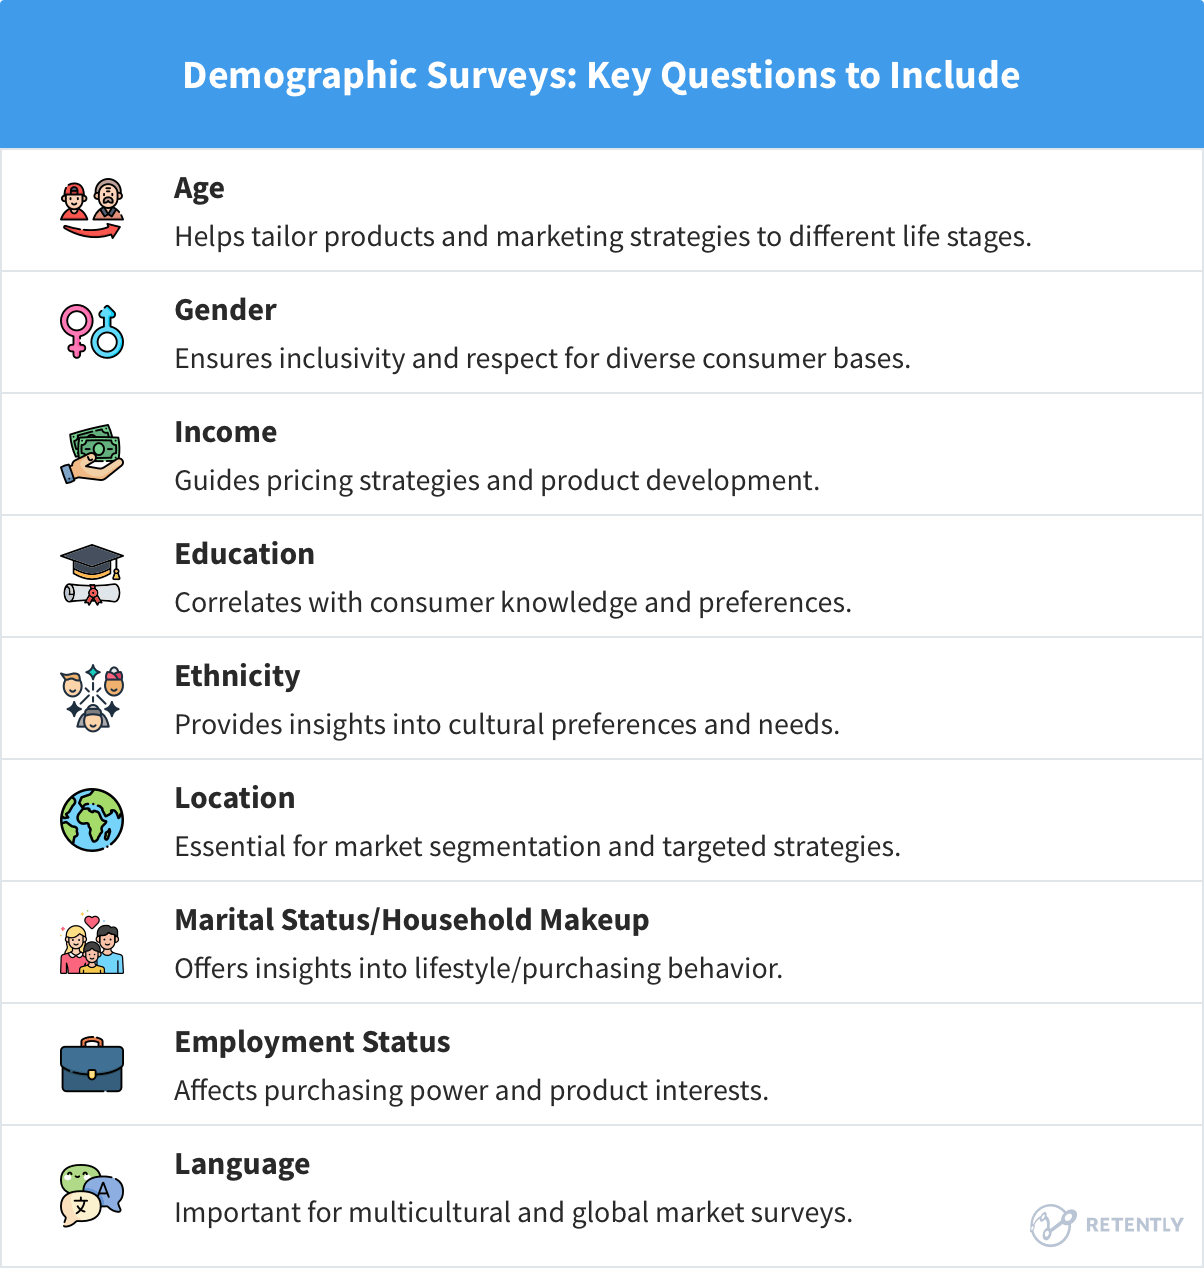 Demographic Surveys: Key Questions to Include